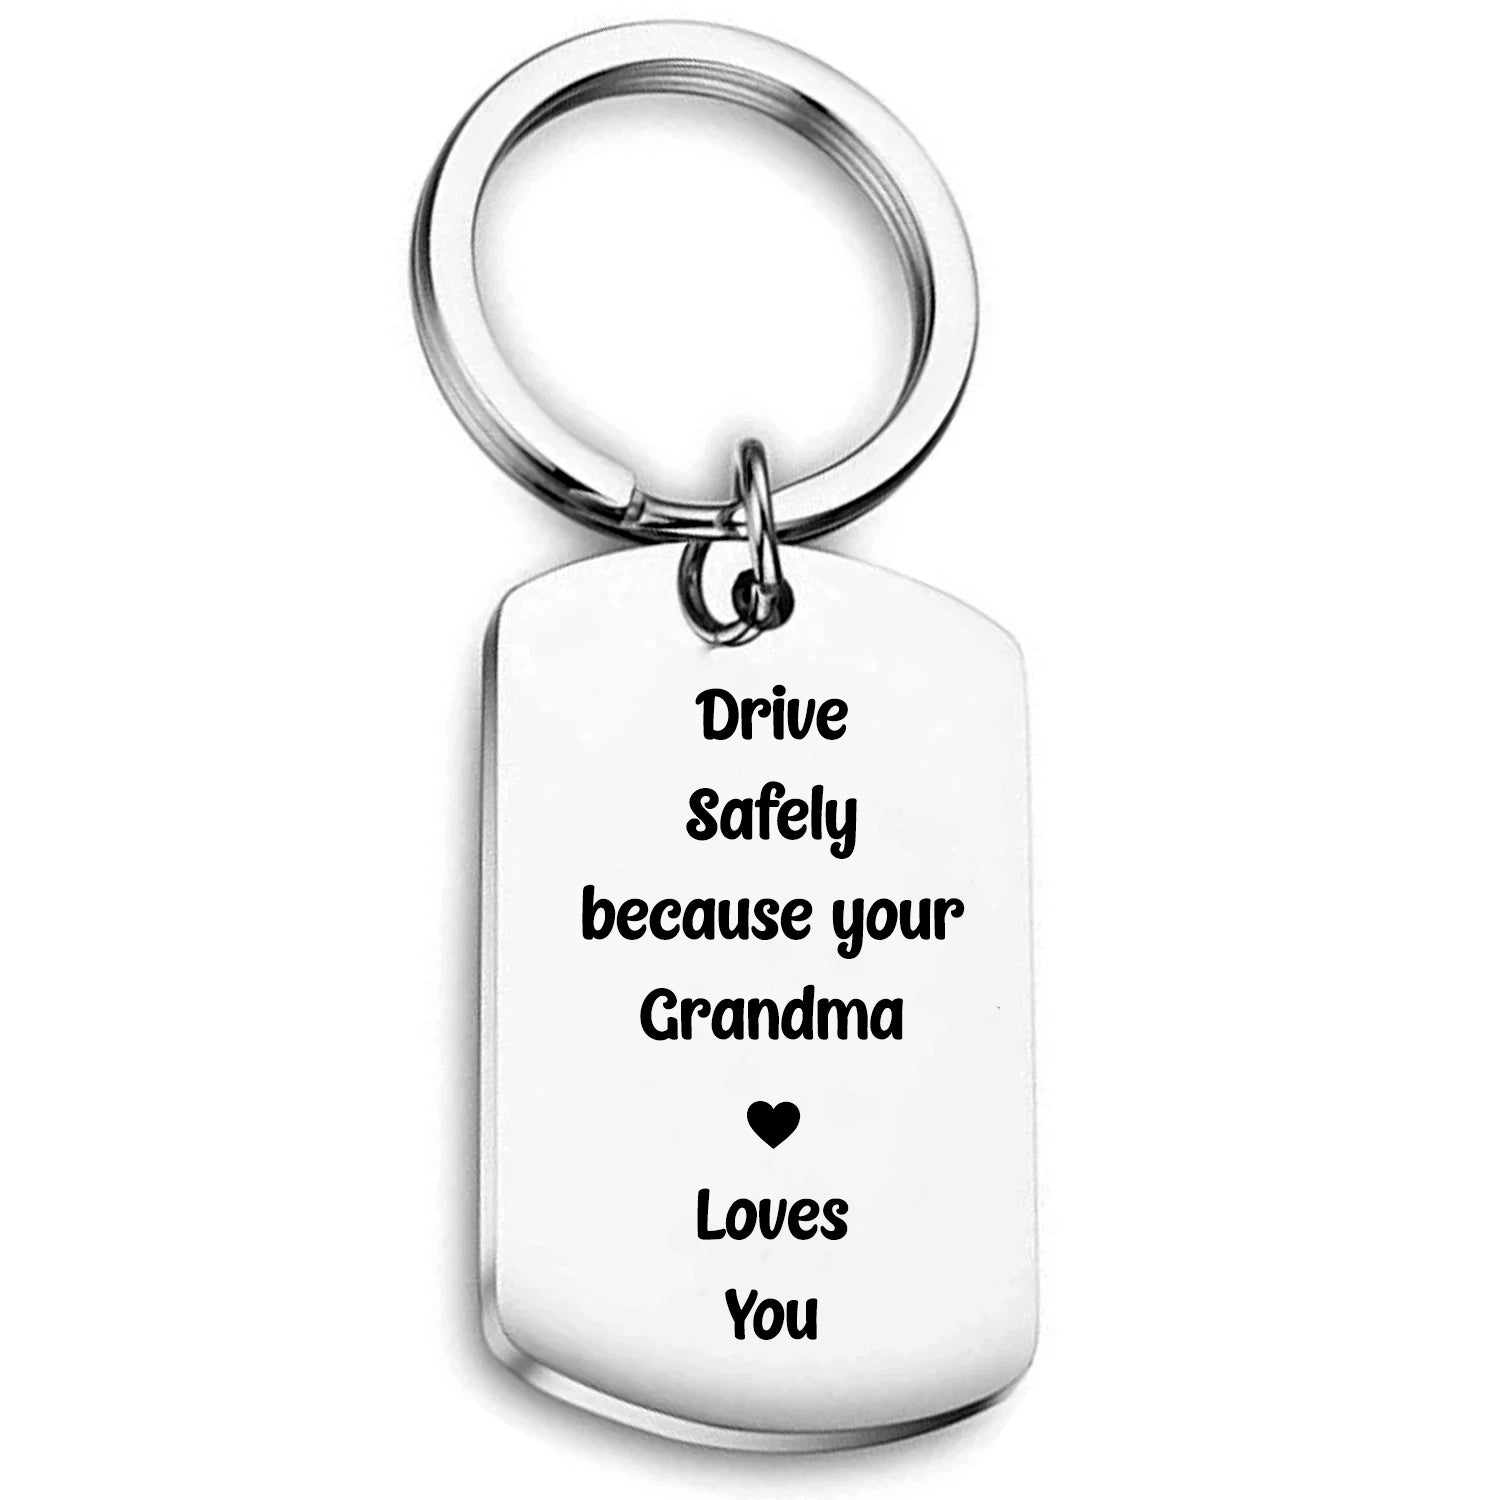 Drive Safely because your Grandma Loves You - Keychain